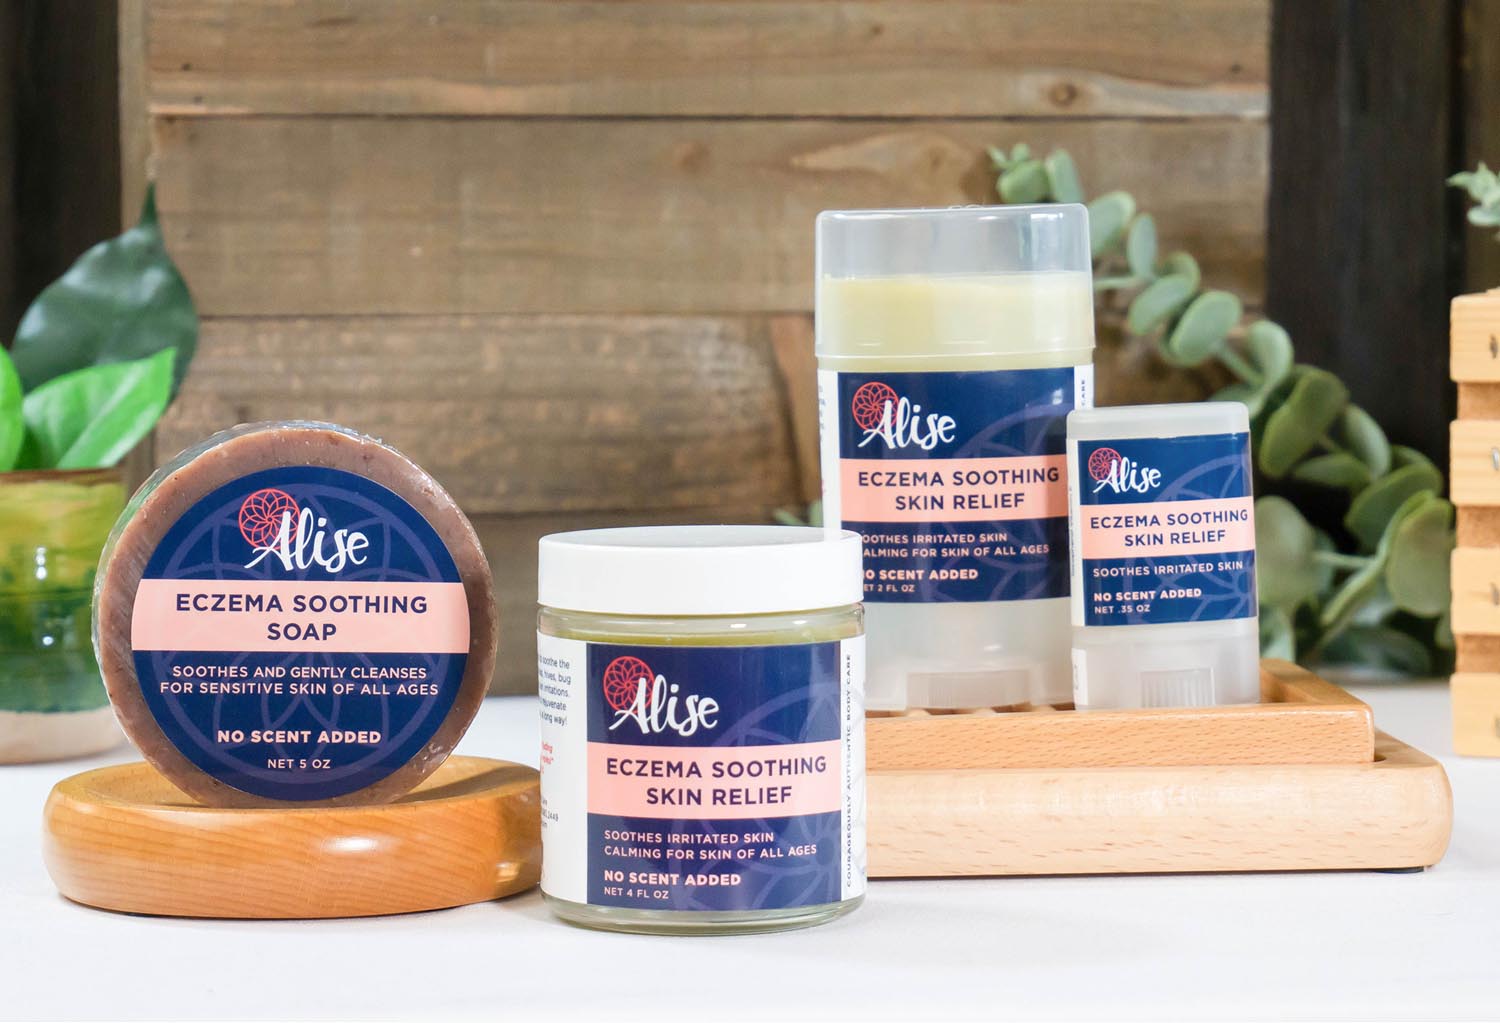 Eczema soothing products soap and salve for itchy skin Alise Body Care